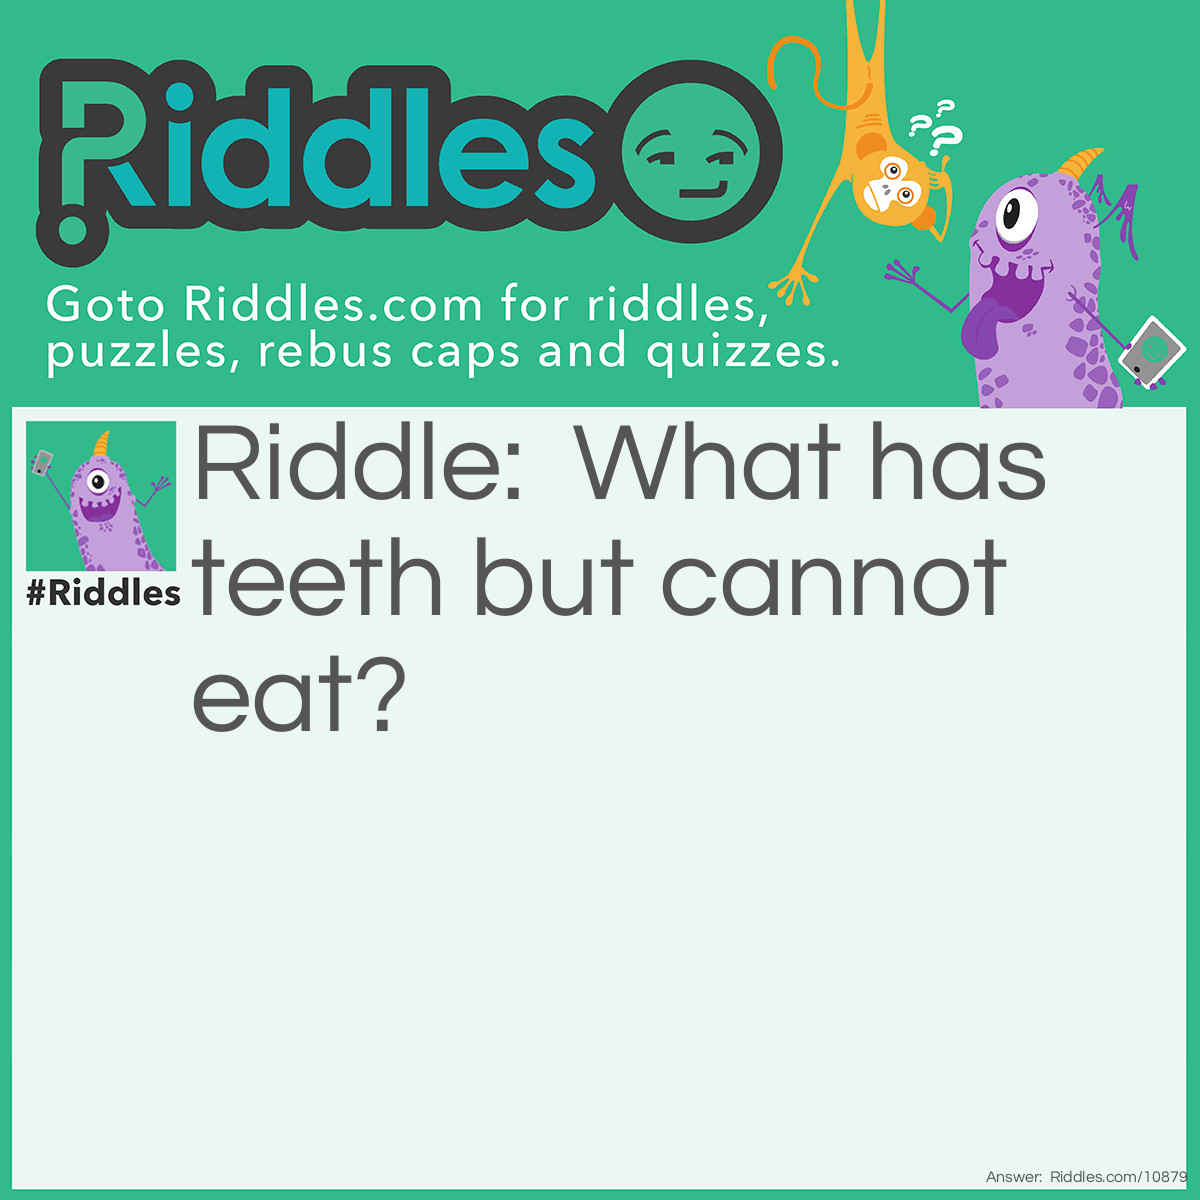 Riddle: What has teeth but cannot eat? Answer: A comb!